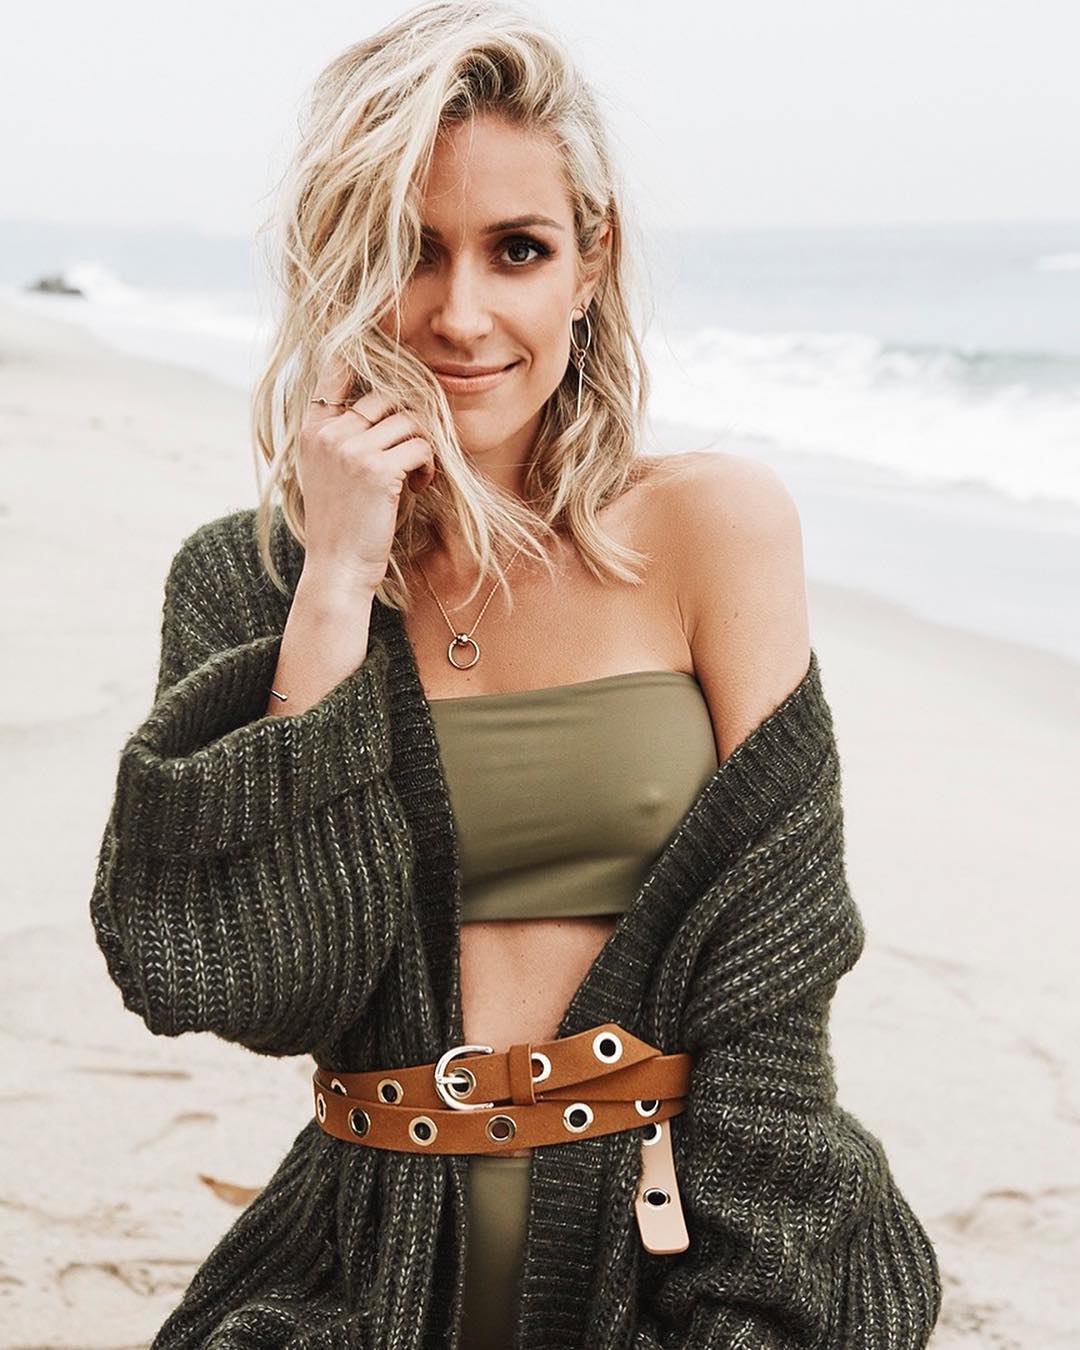 49 Bikini Pictures Of Kristin Cavallari Which Will Get You Addicted To Her Sexy Body | Best Of Comic Books